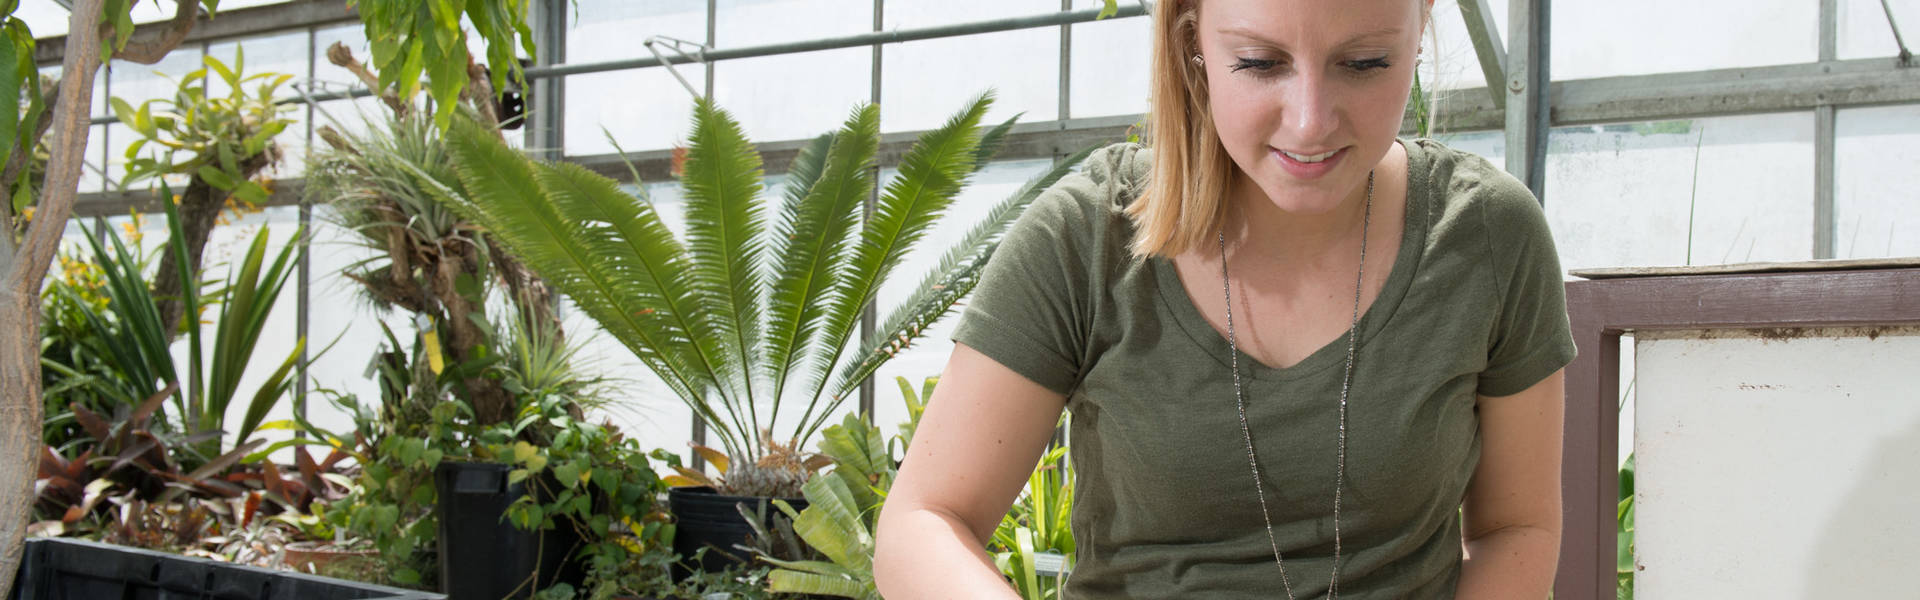 Student tending the greenhouse.